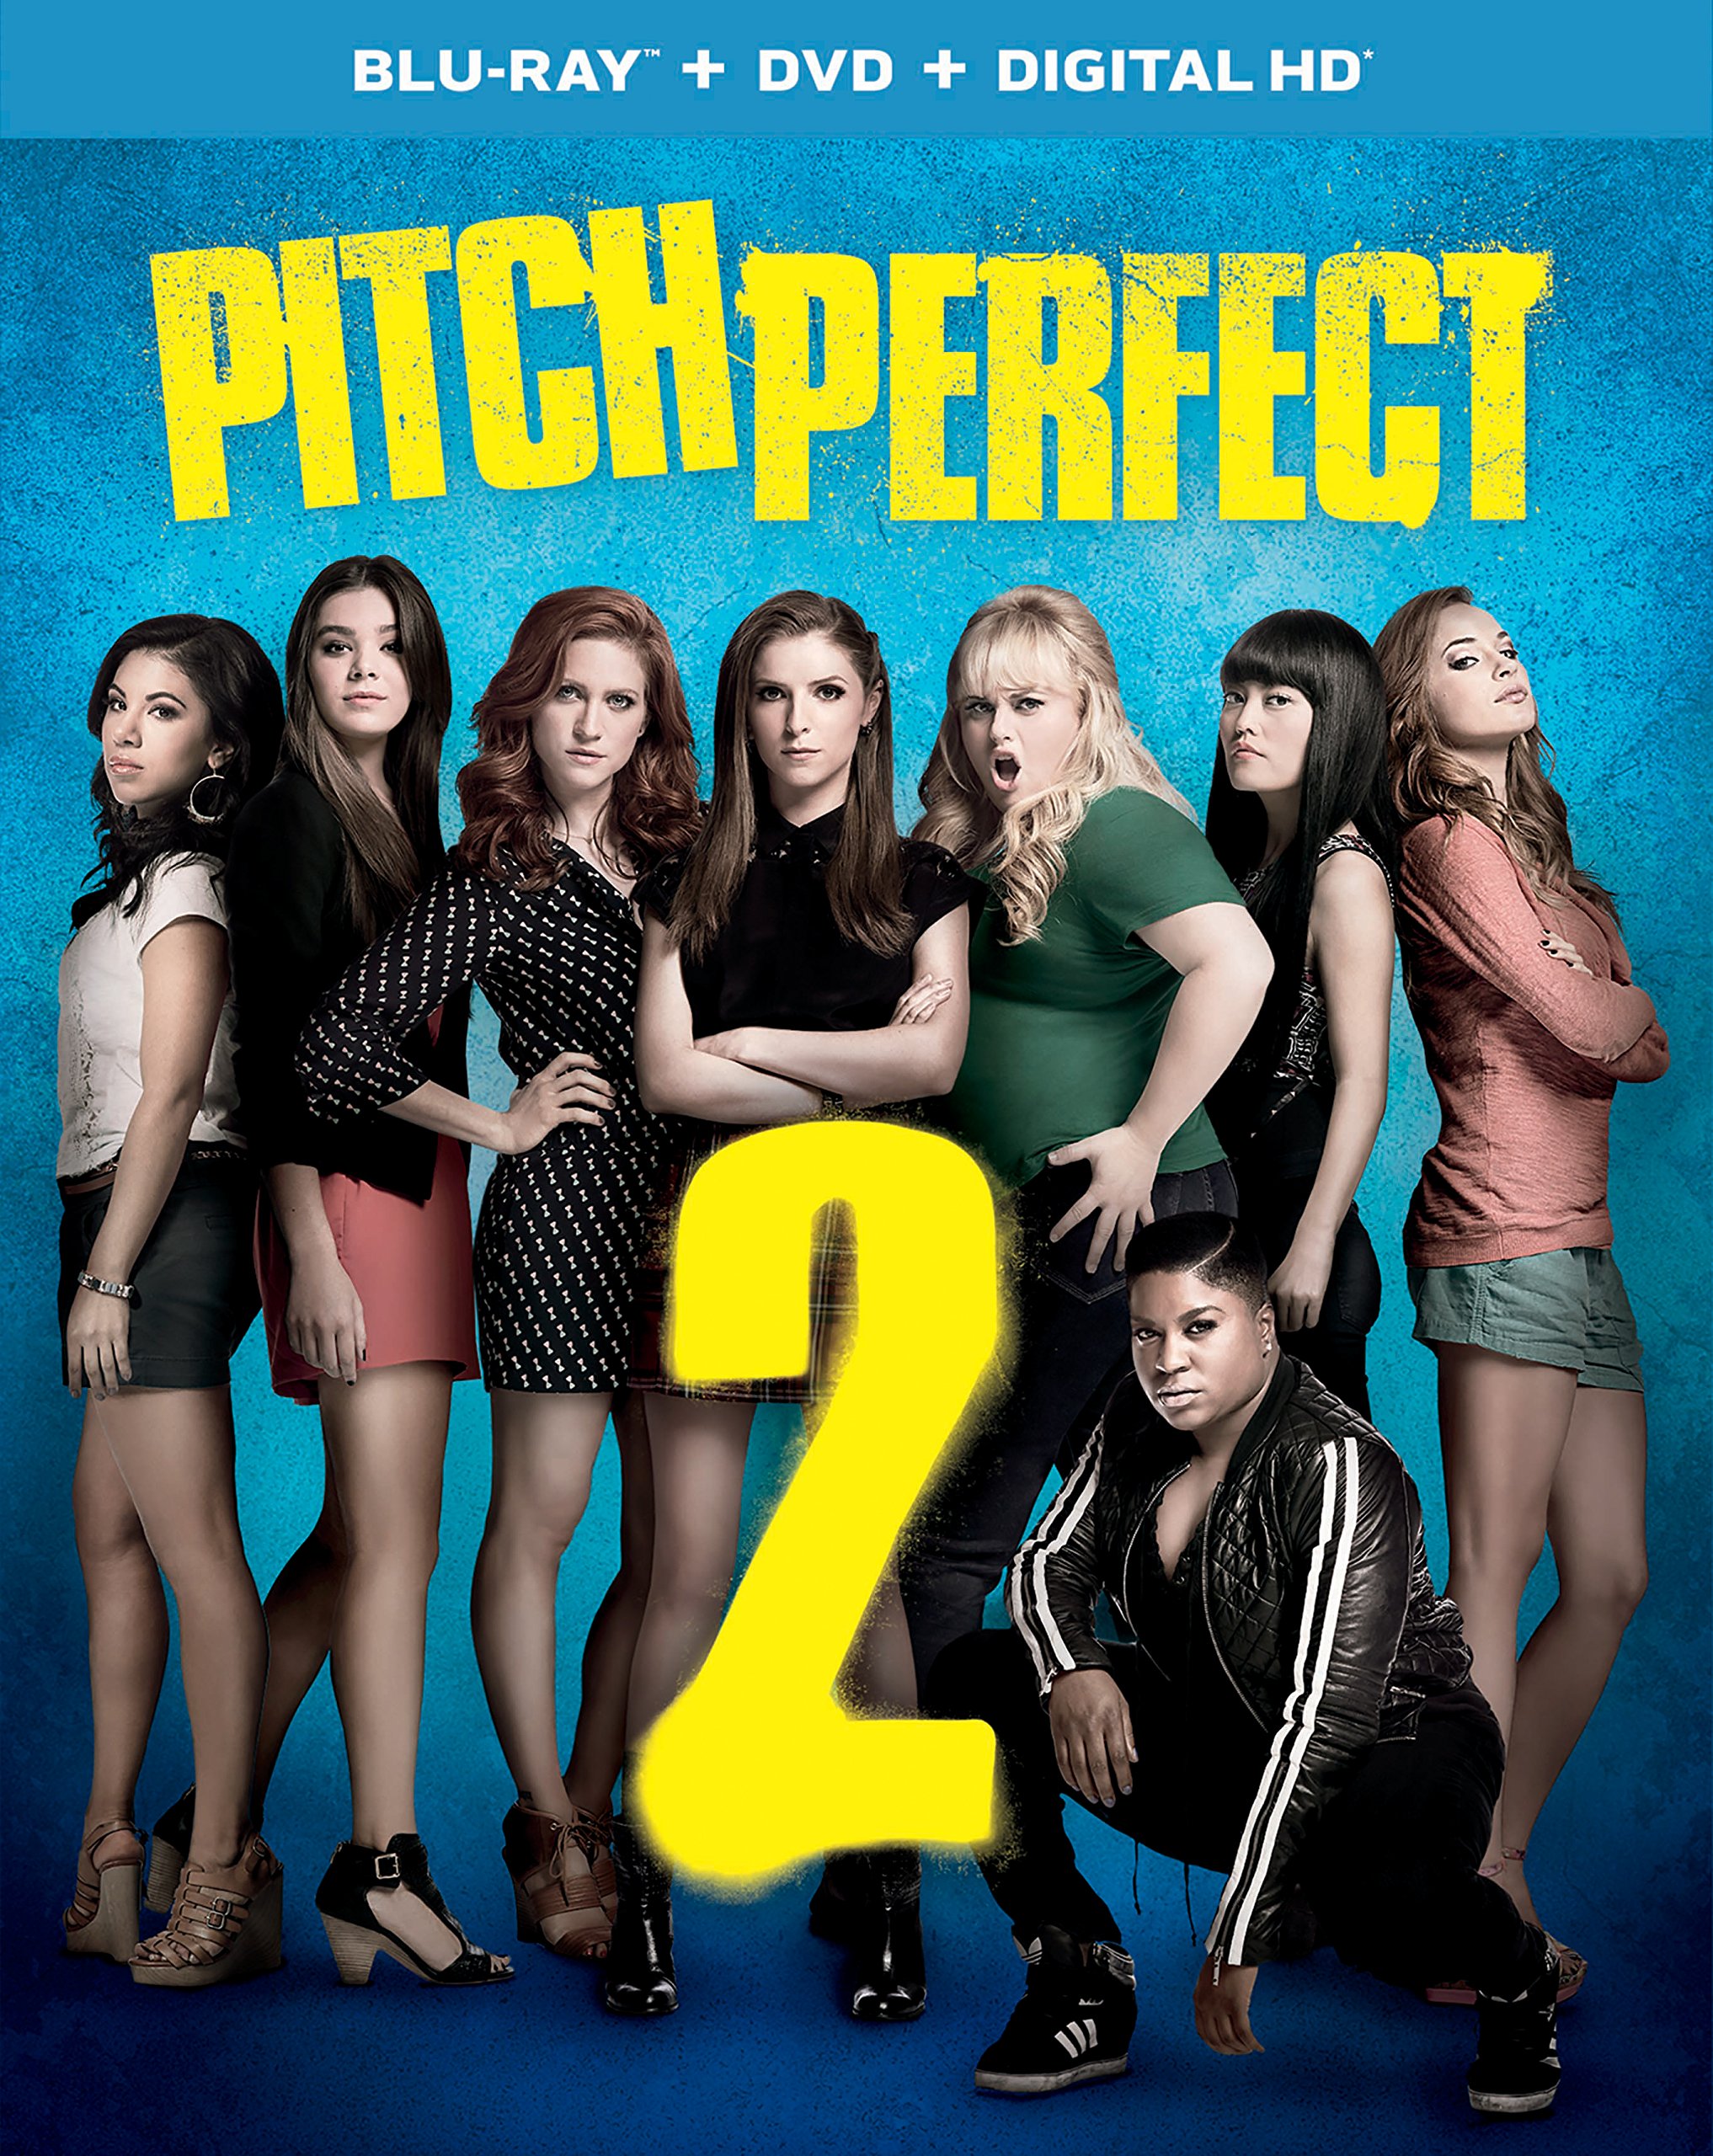 Pitch Perfect 2 DVD Release Date September 22 2015.